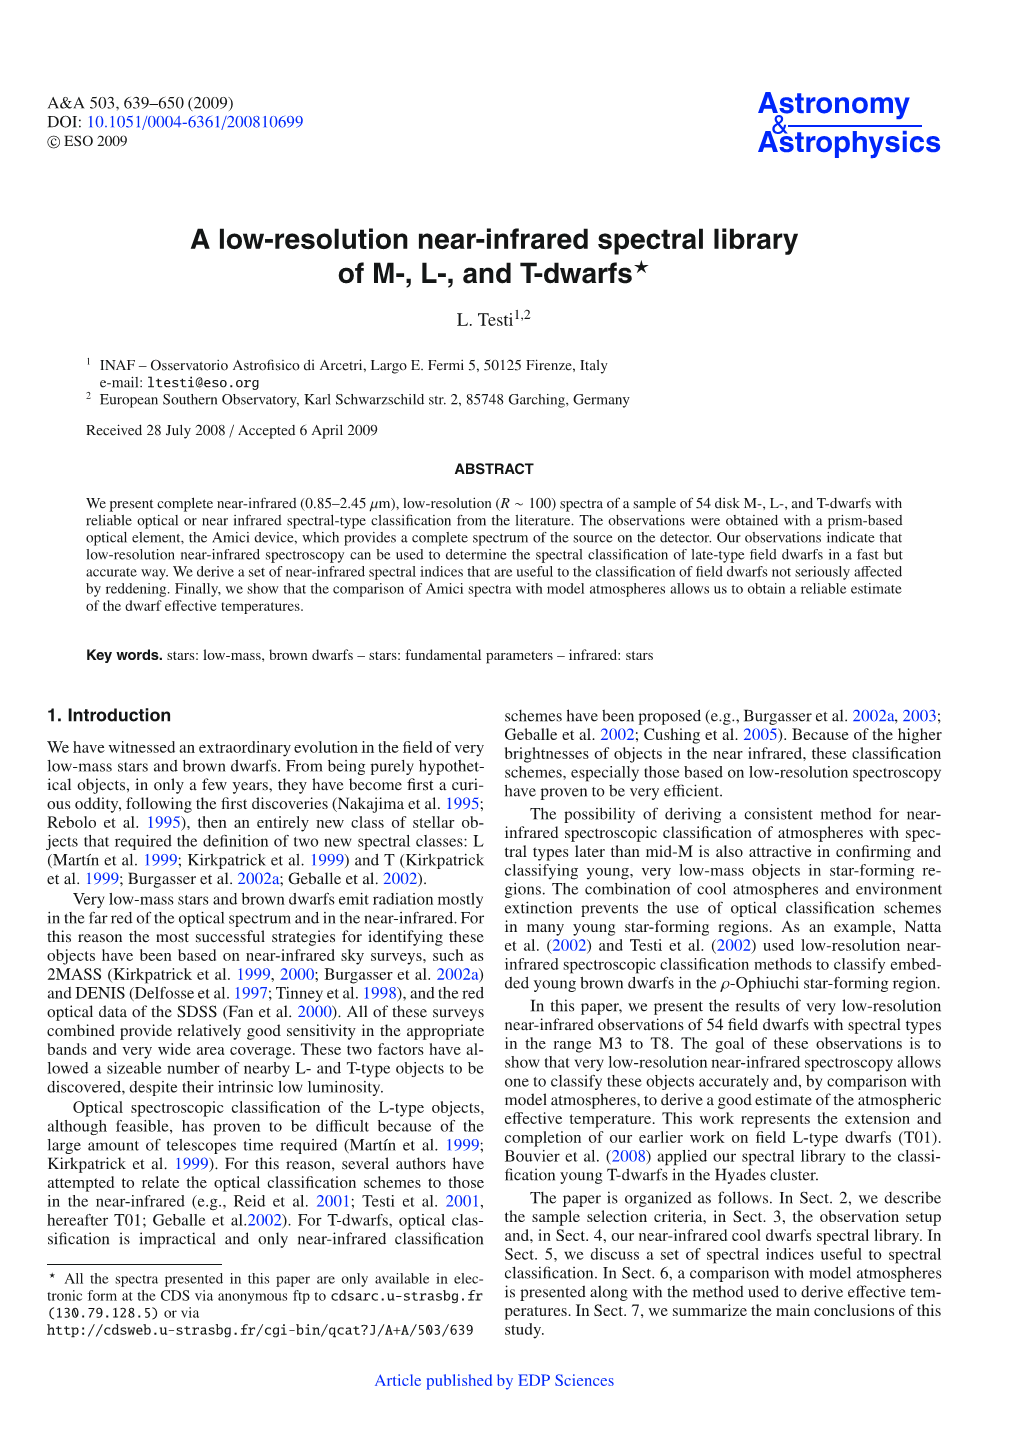 A Low-Resolution Near-Infrared Spectral Library of M-, L-, and T-Dwarfs